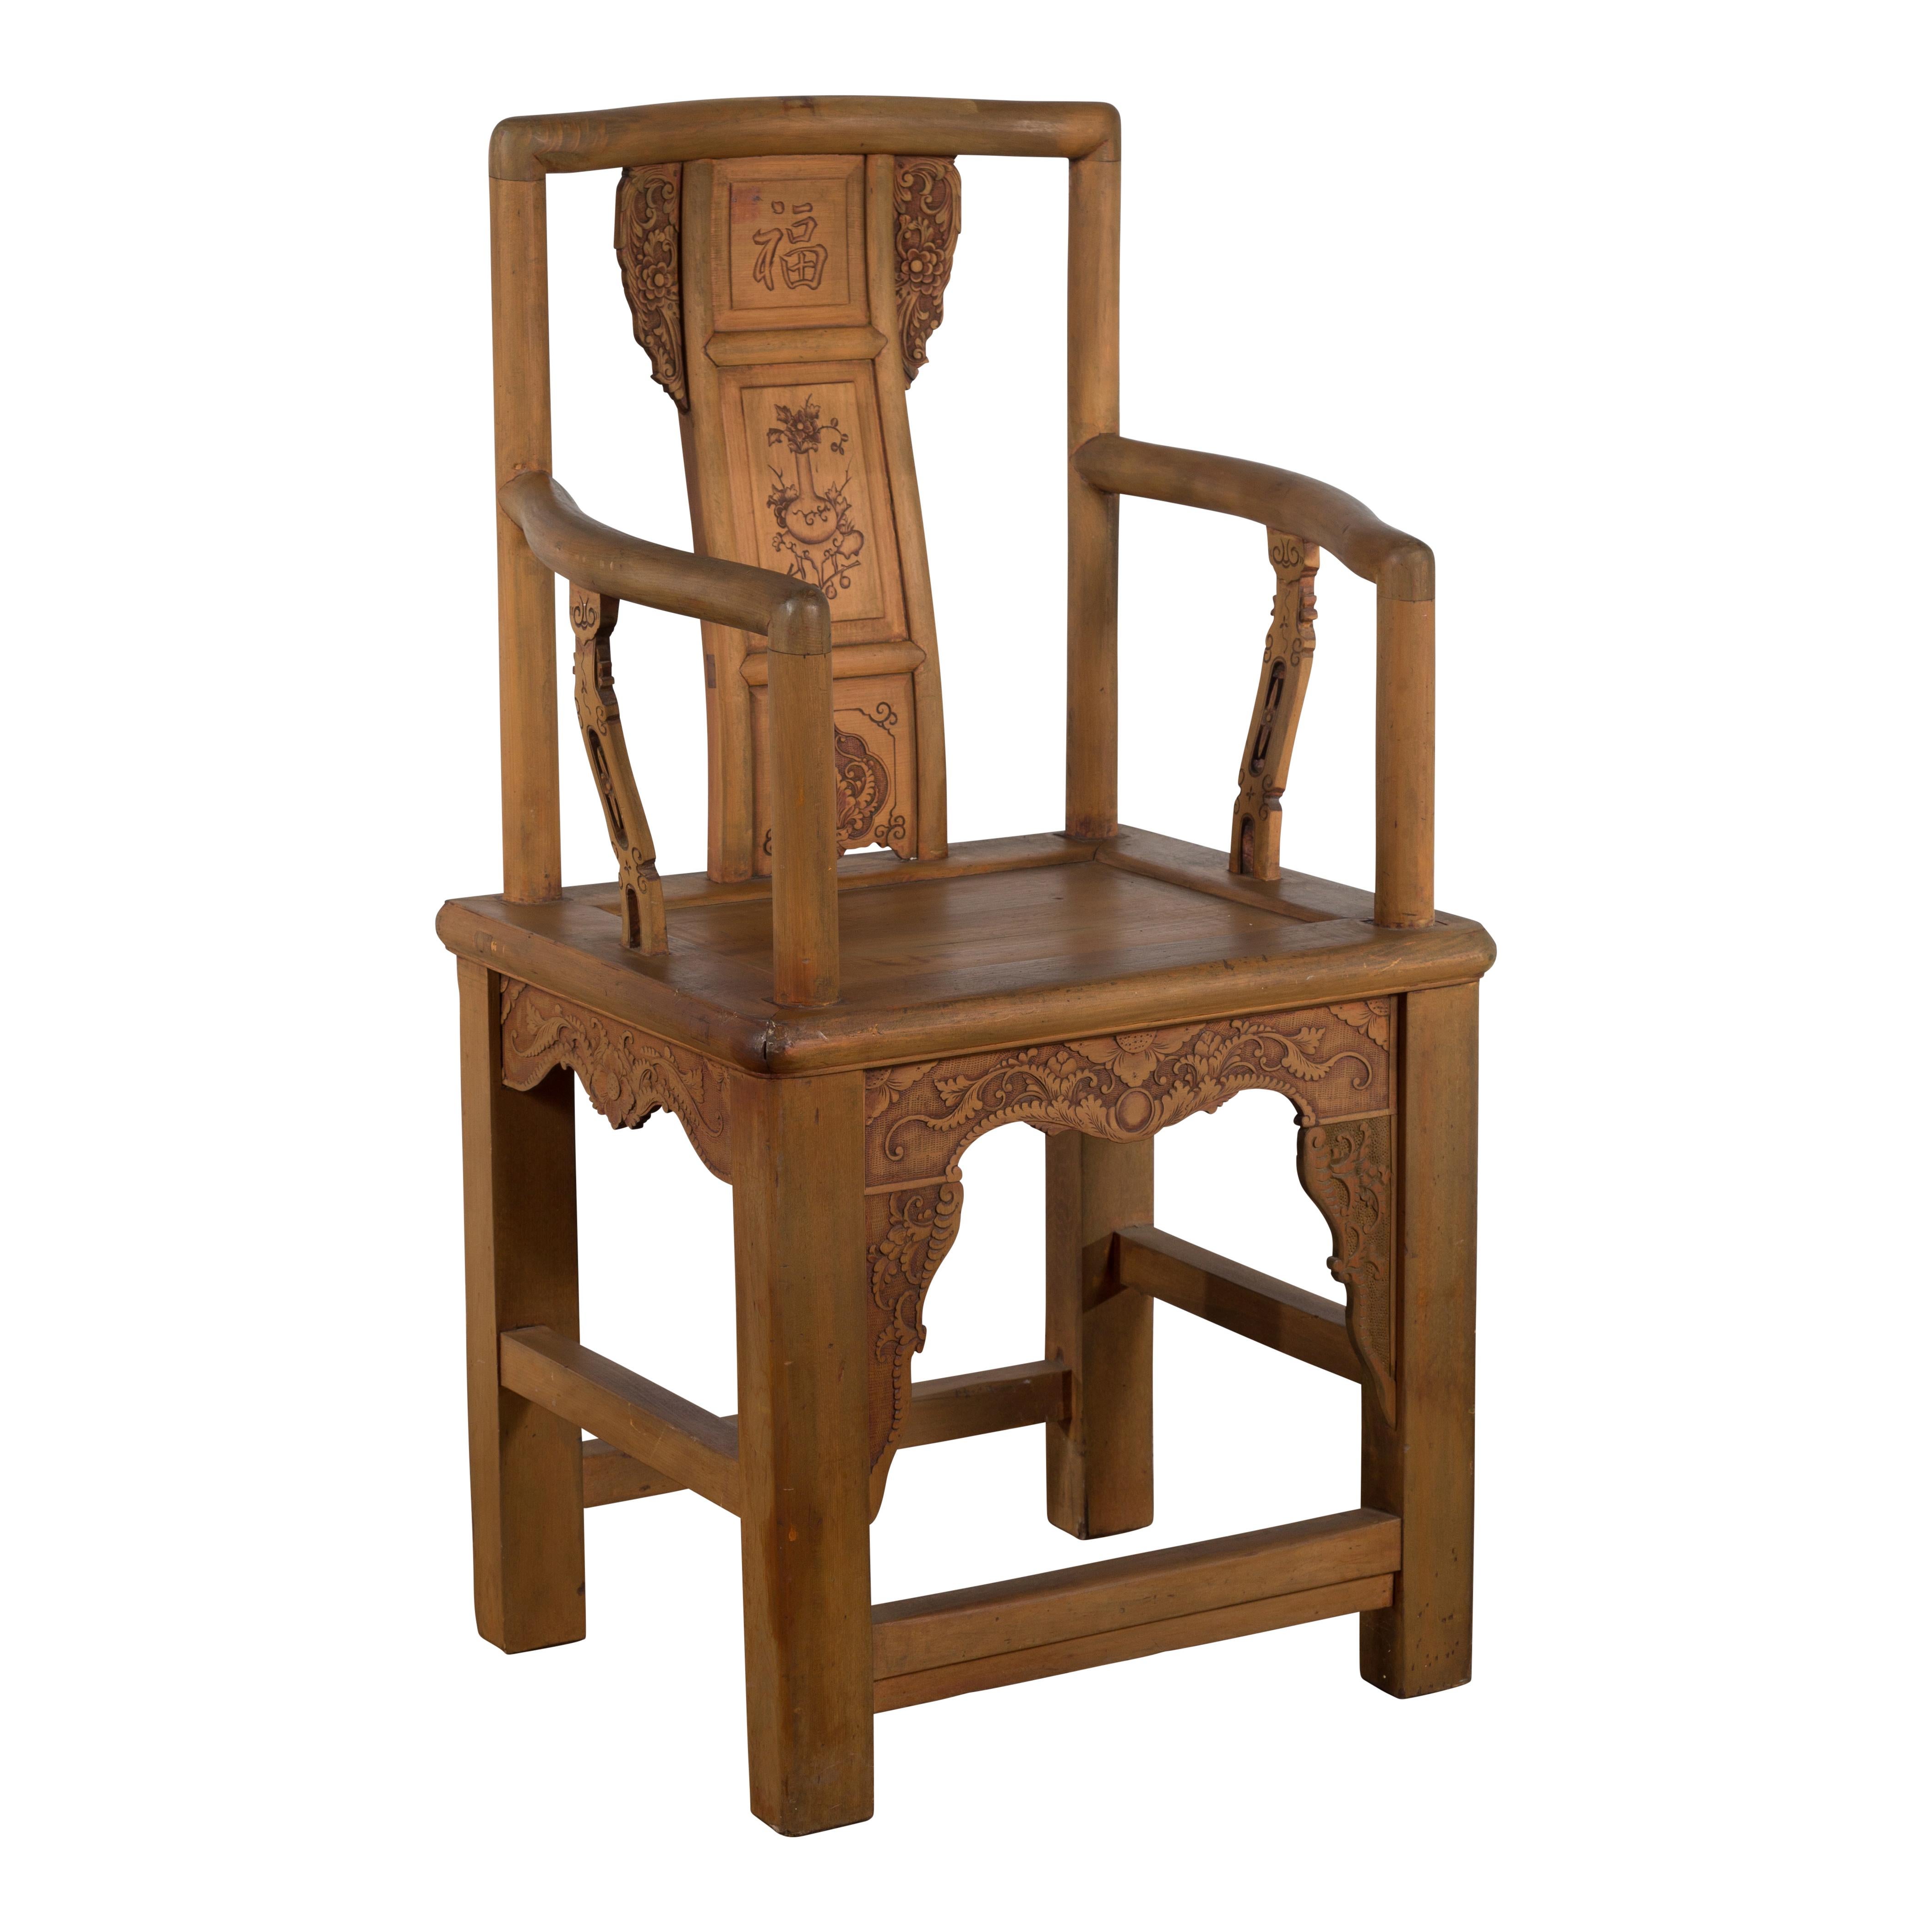 A Chinese Qing Dynasty period carved wooden lacquered elmwood armchair from the 19th century, with traditional auspicious motifs. Created in China during the Qing Dynasty, this elm armchair features a straight, slightly in-curving back showcasing a